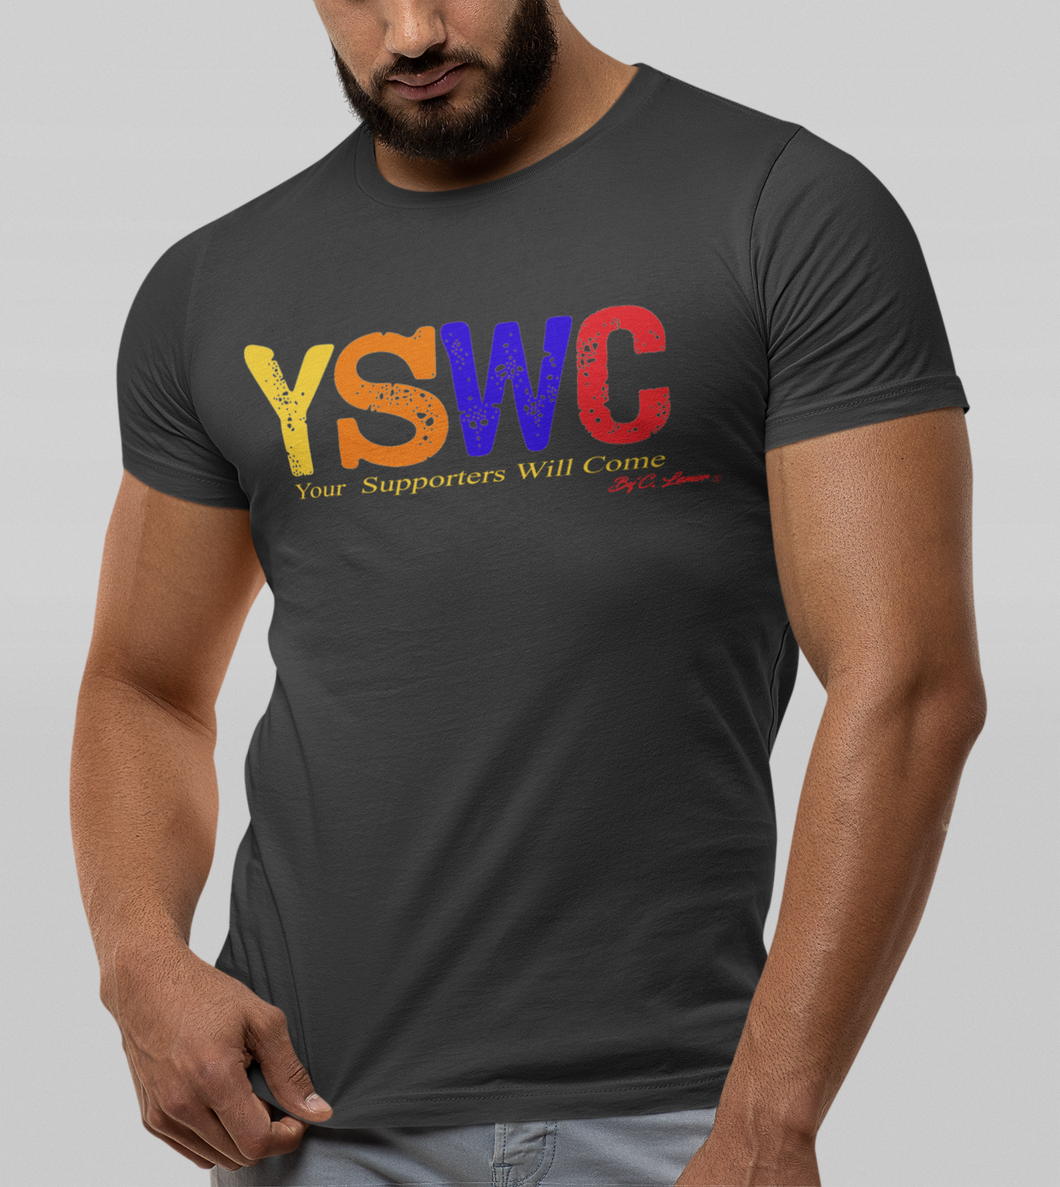 By' C. Lamor- YSWC Letter, Dark Gray tshirt, in the colors Red, Blue, Orange and Yellow for Gentlemen